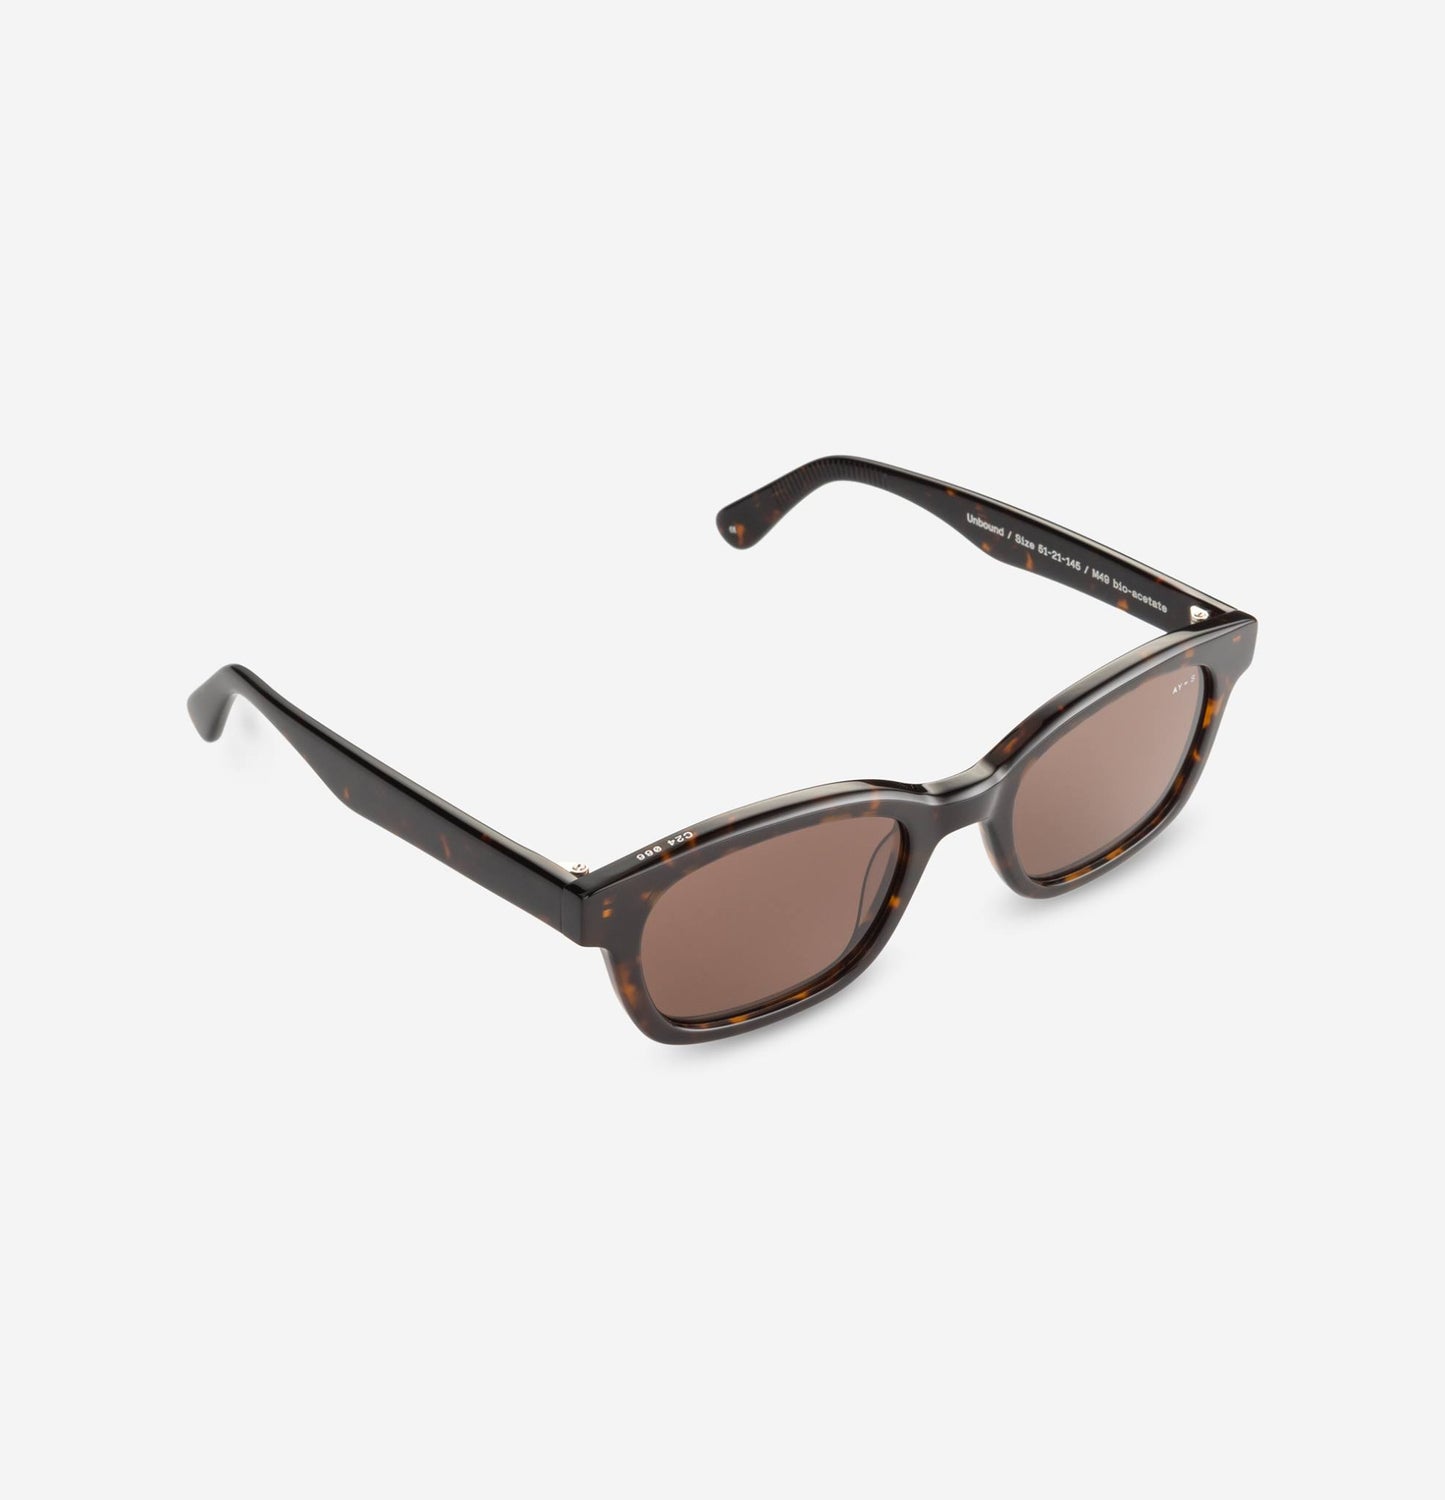 James AY Sunglasses - Unbound, Two Colour Options